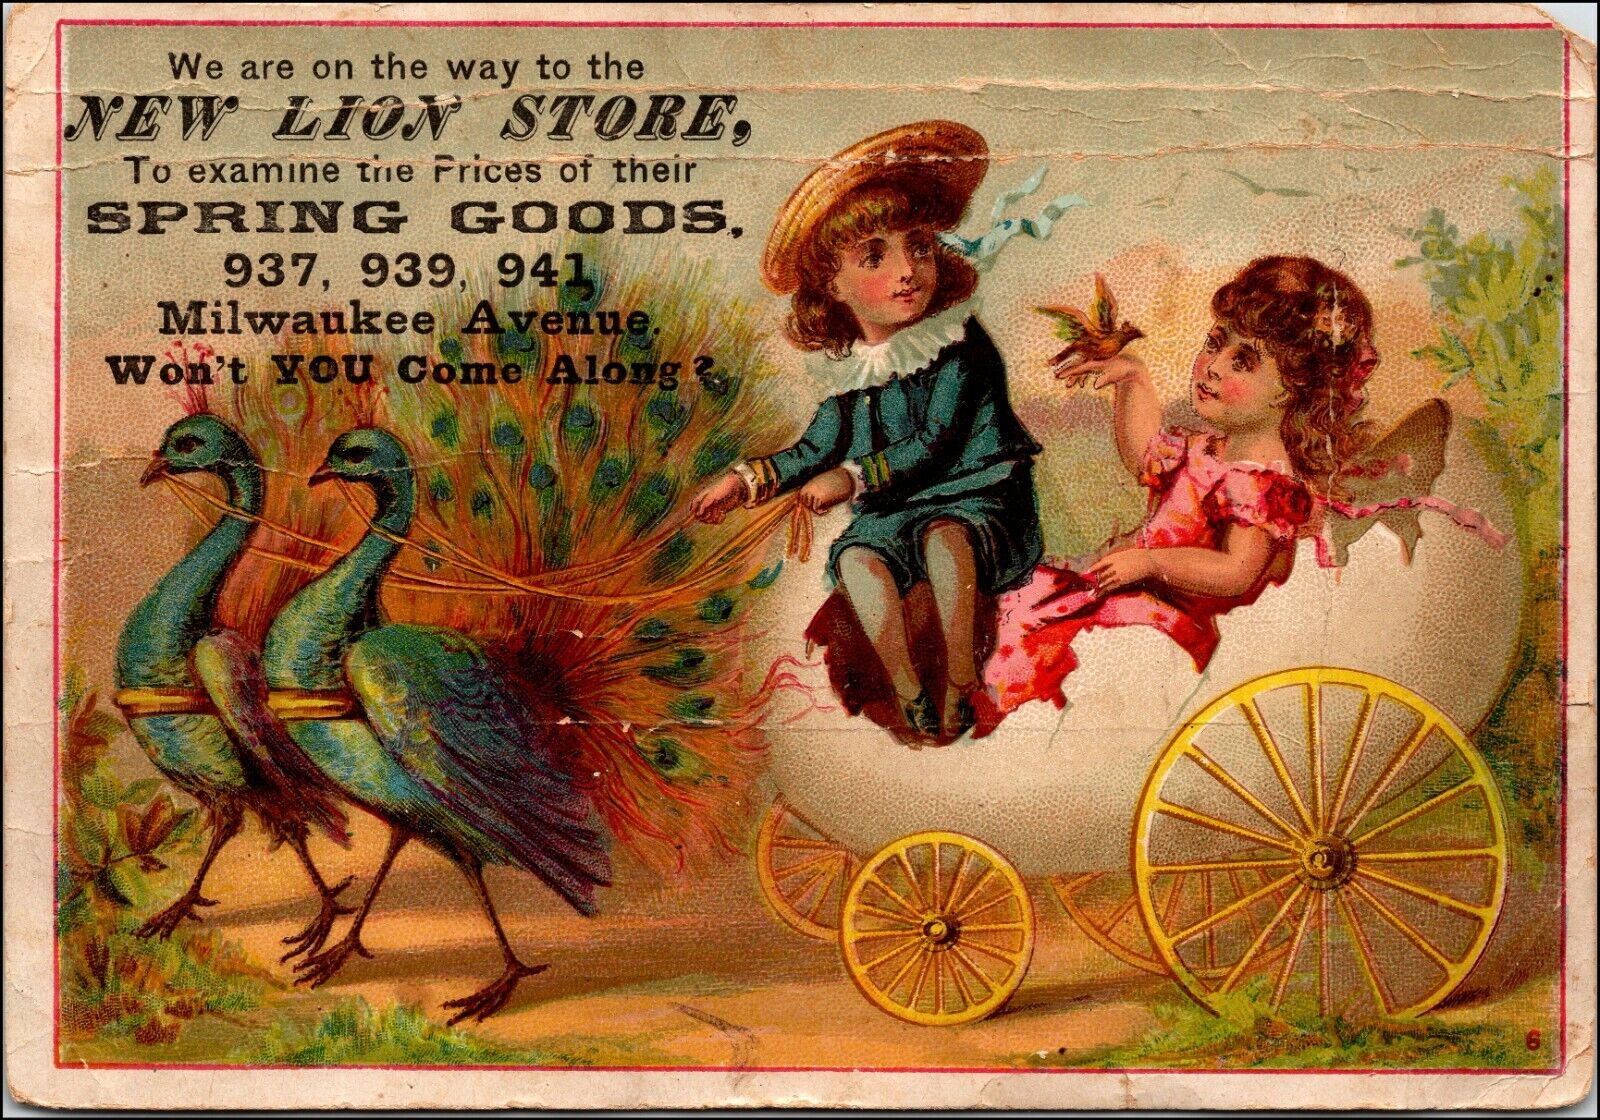 C.1880/90s Lion Store. Peacock Fantasy Boy. Victorian Trade Card Milwaukee, WI.